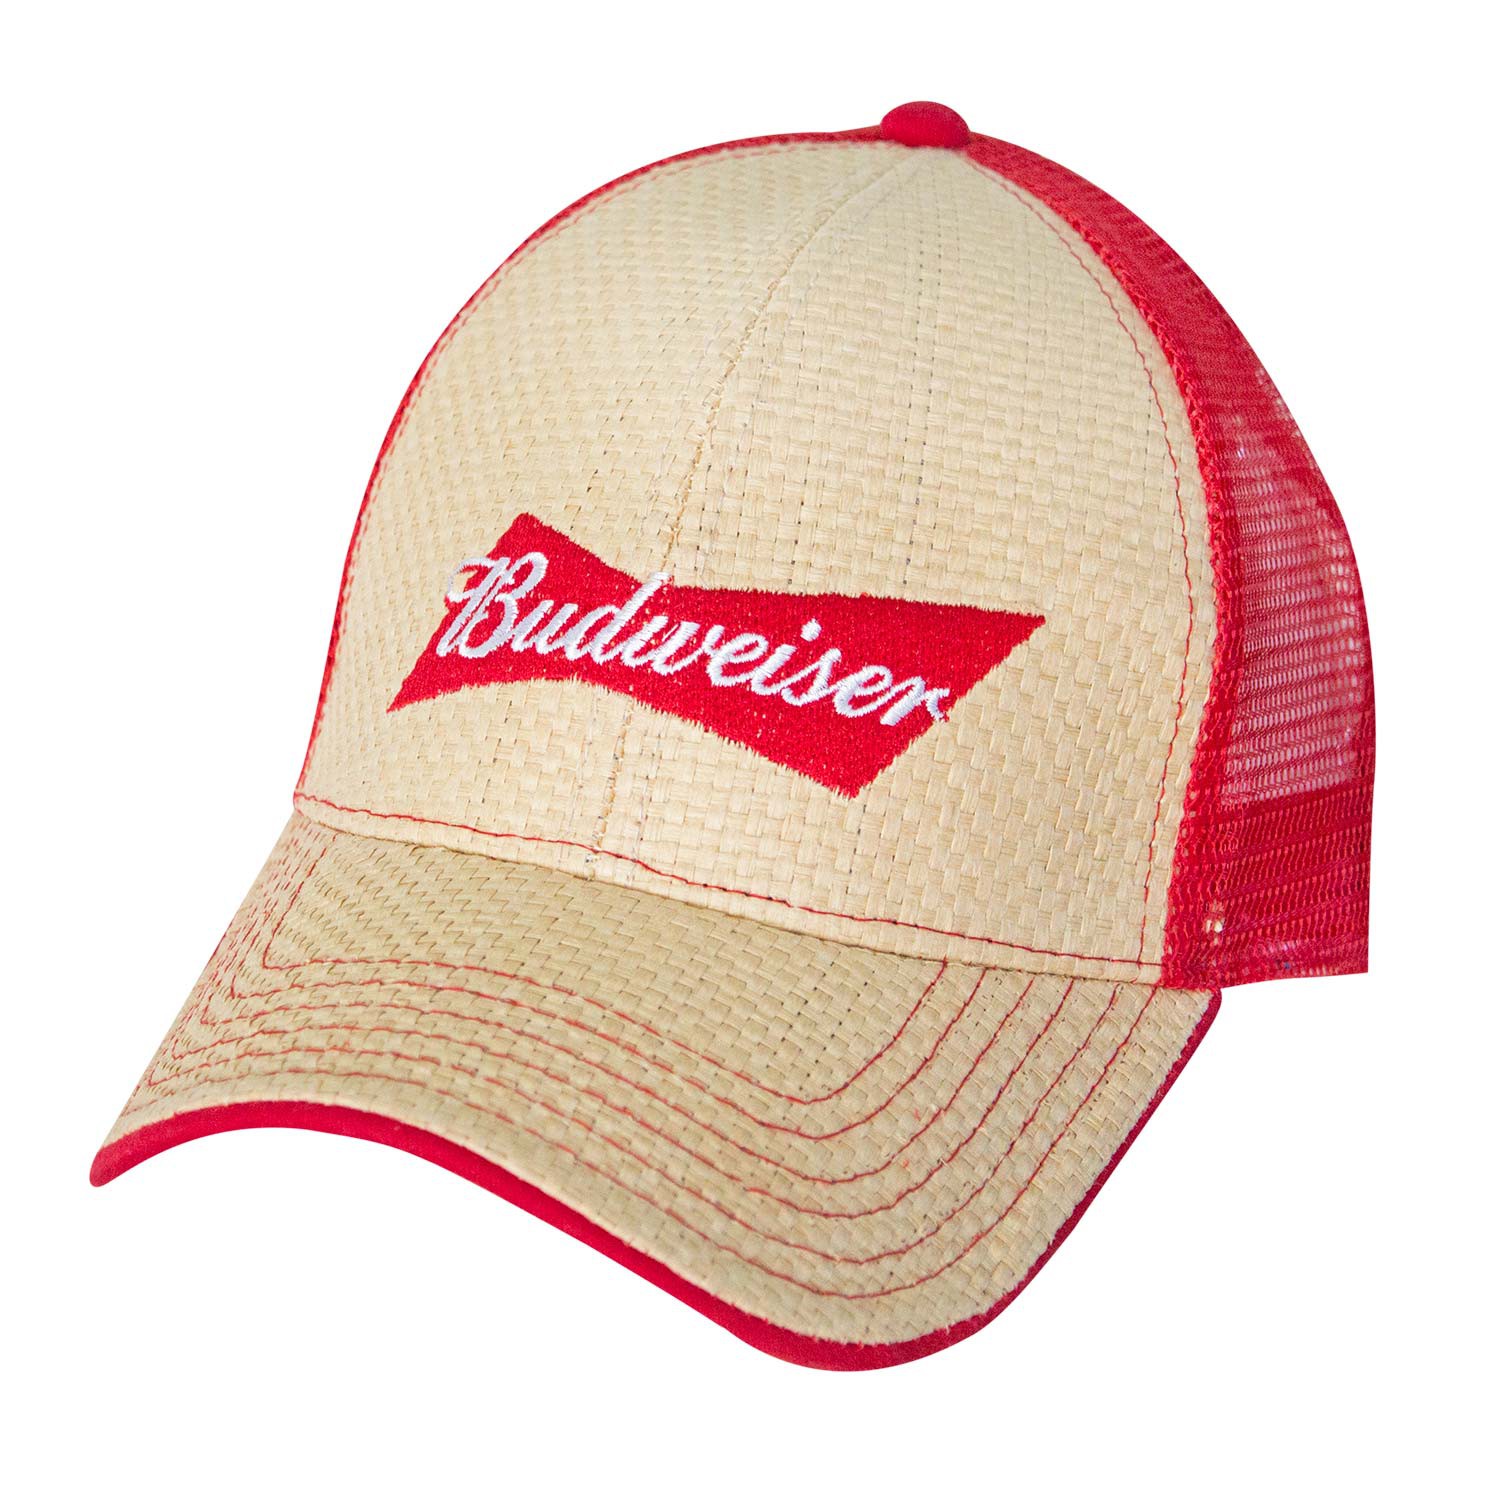 https://mmv2api.s3.us-east-2.amazonaws.com/products/images/Budweiser_Straw_Woven_Red_Trucker_Hat_LG.jpg